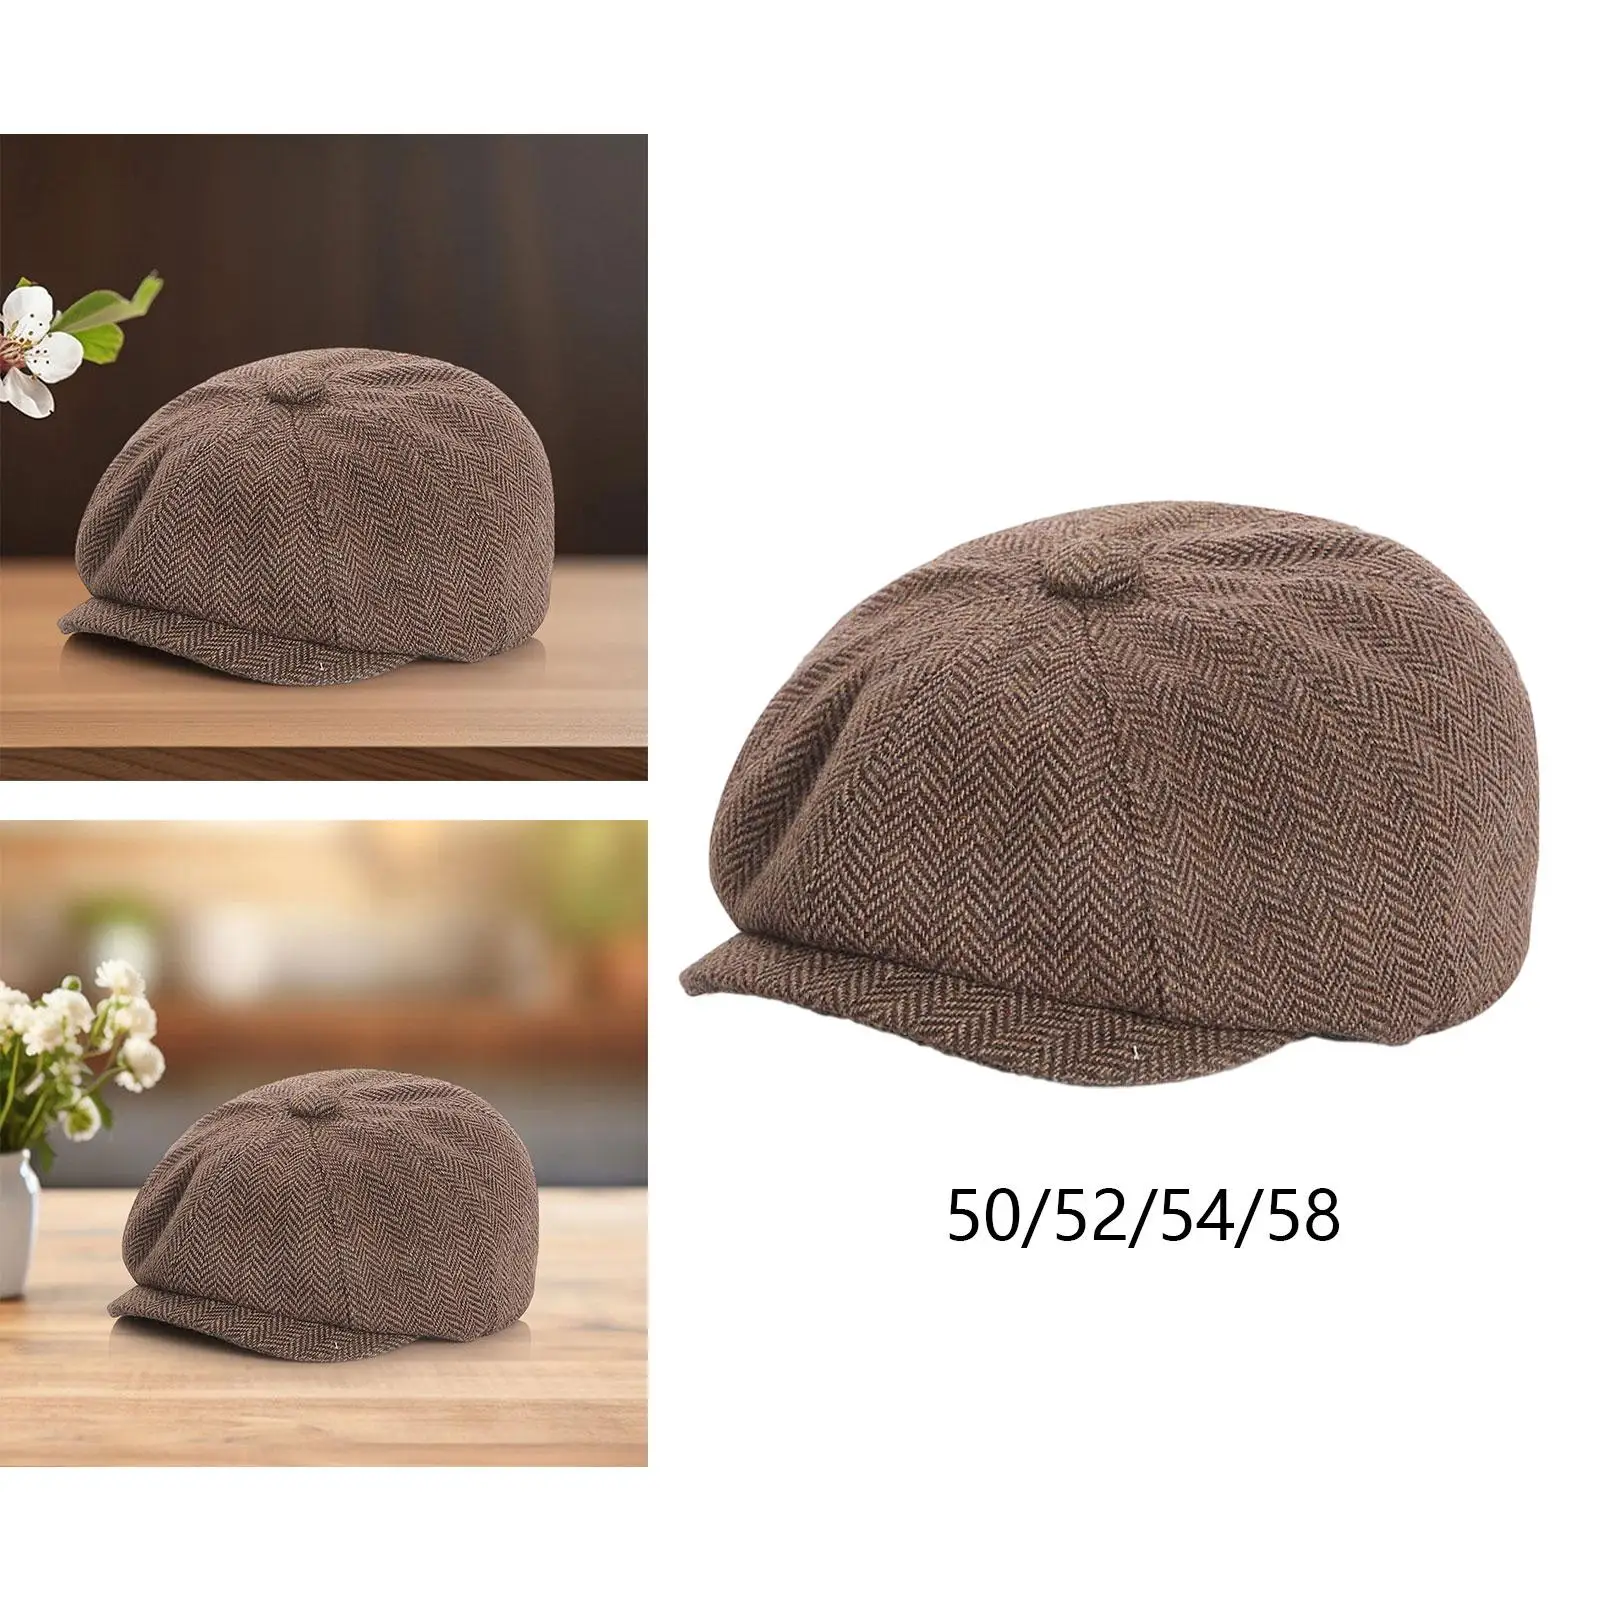 Beret Hat British Autumn Winter Classic Painter Hat Fall Newsboy Hat Cabbie Hat for Fishing Hiking Traveling Outdoor Driving